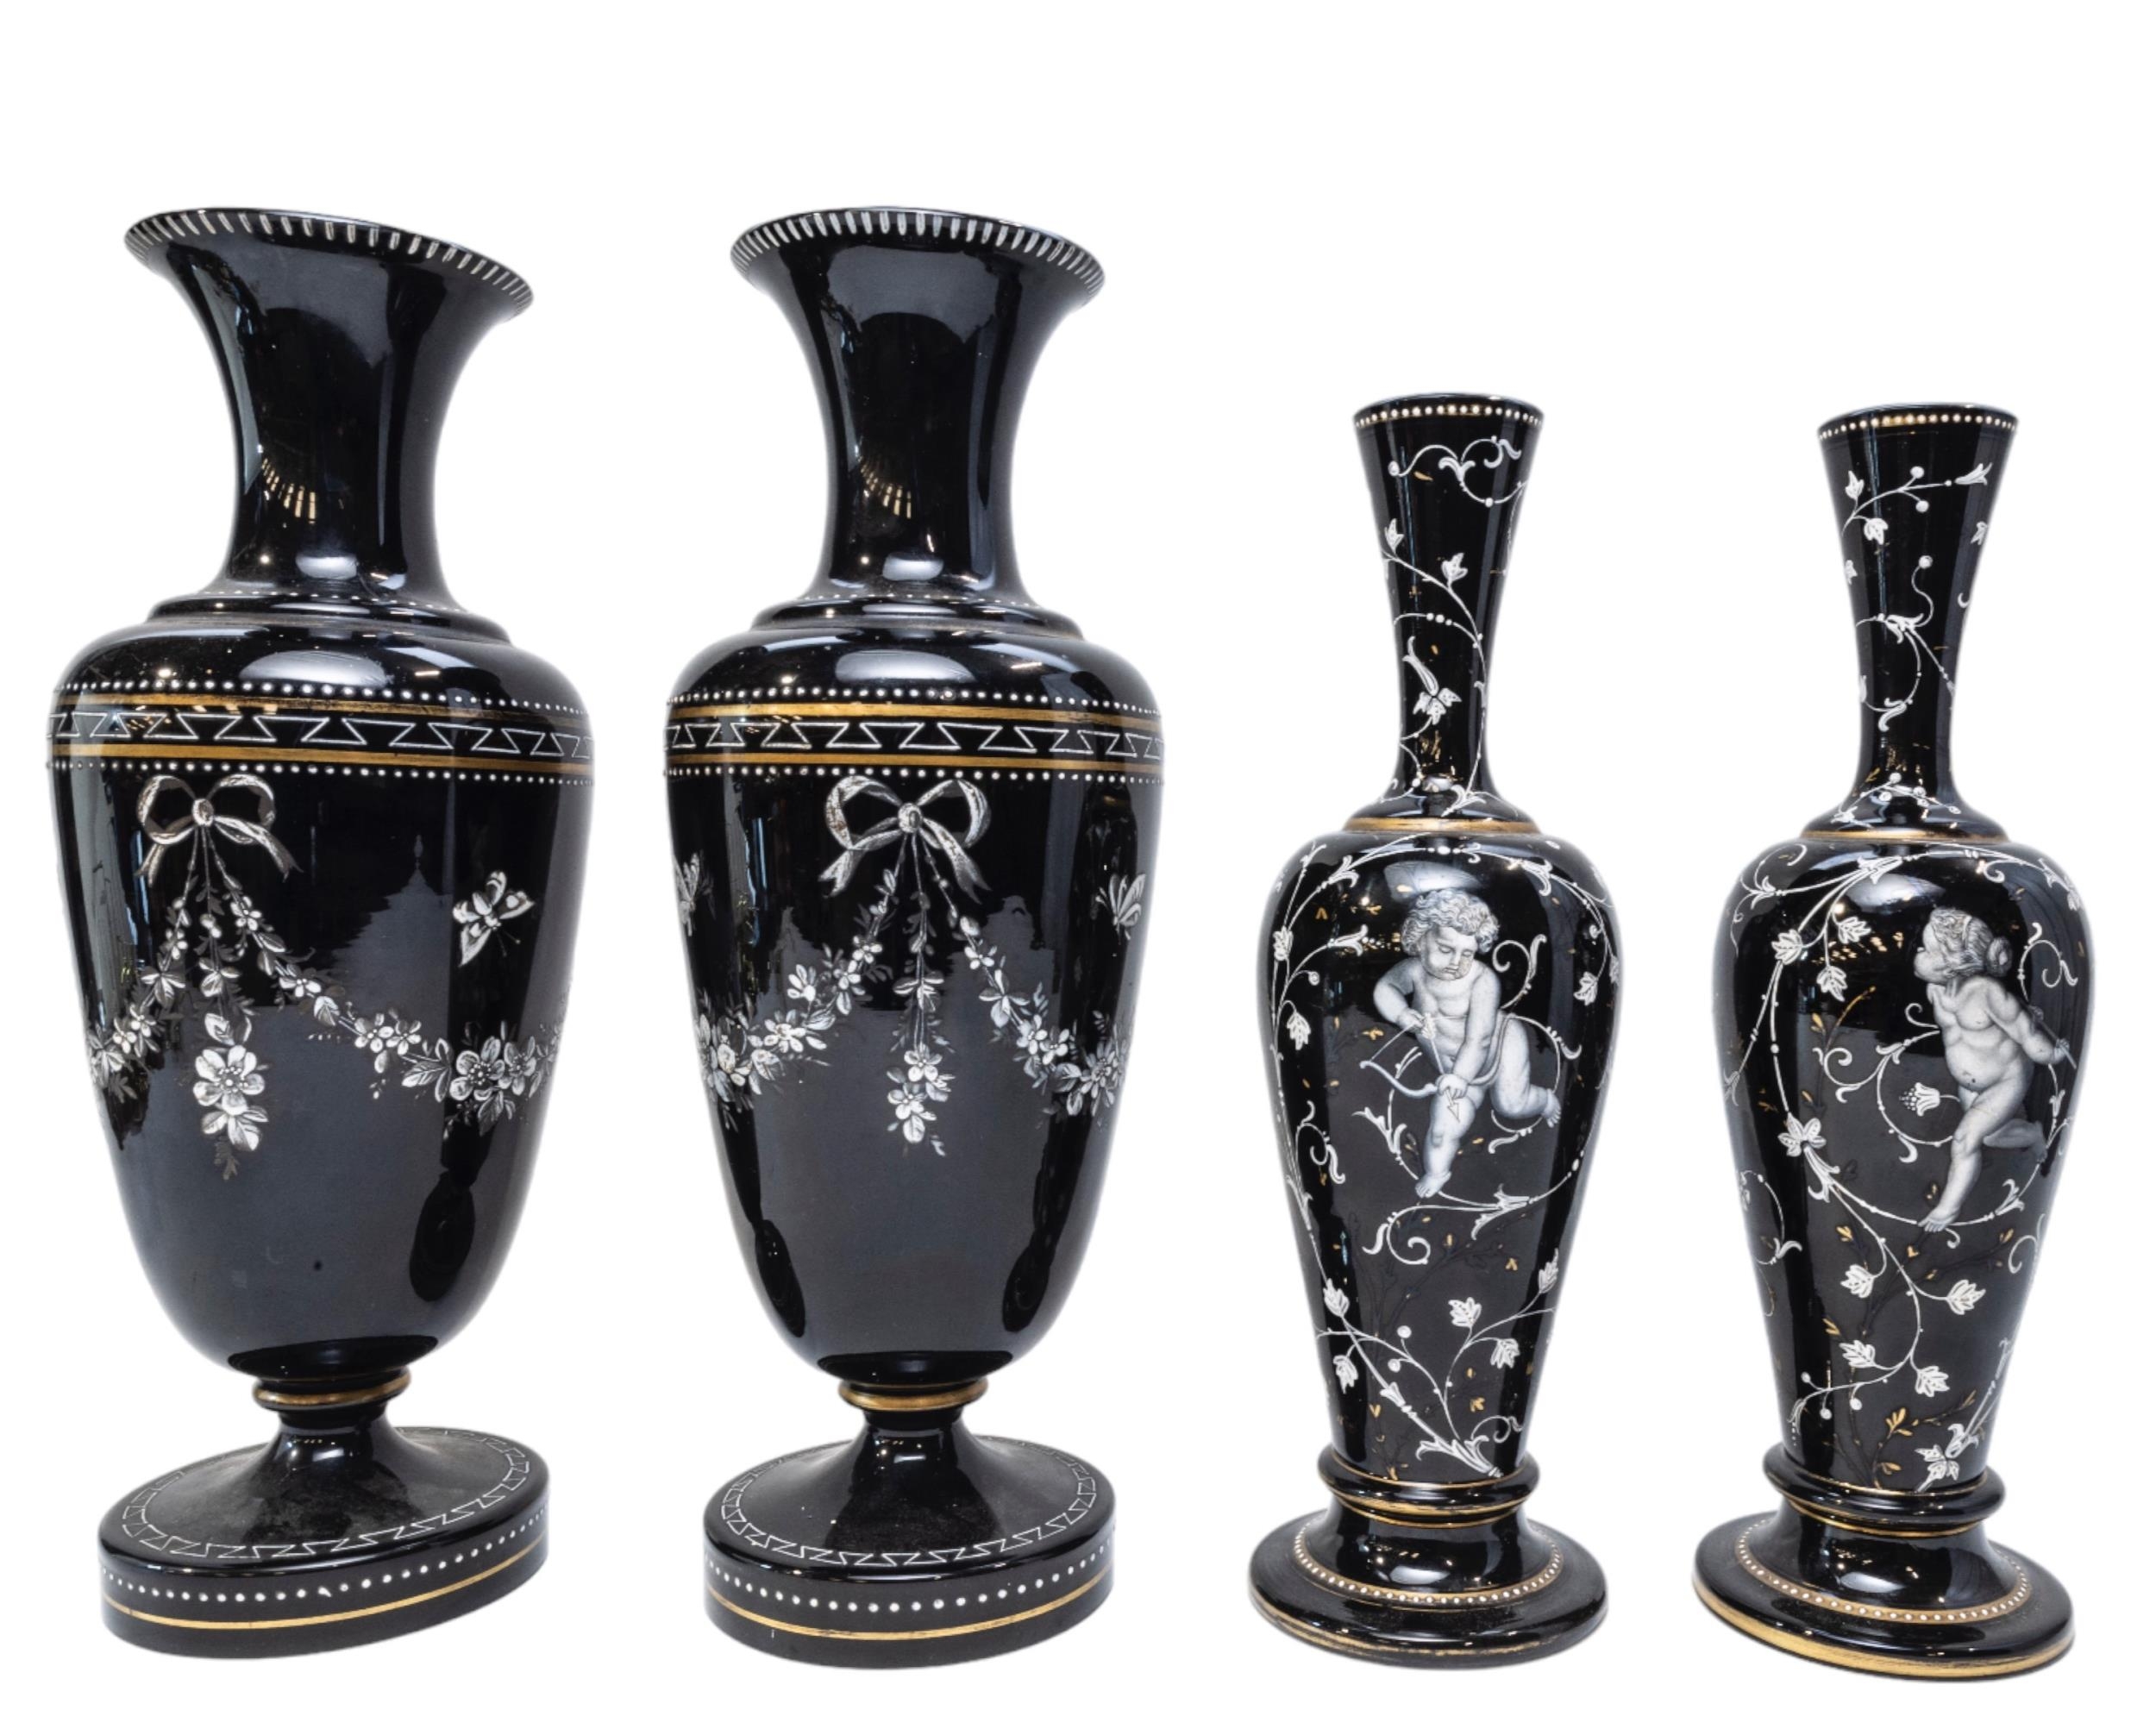 TWO PAIRS OF 19TH CENTURY OVERPAINTED GLASS VASES, the larger pair painted with ribbon tied floral